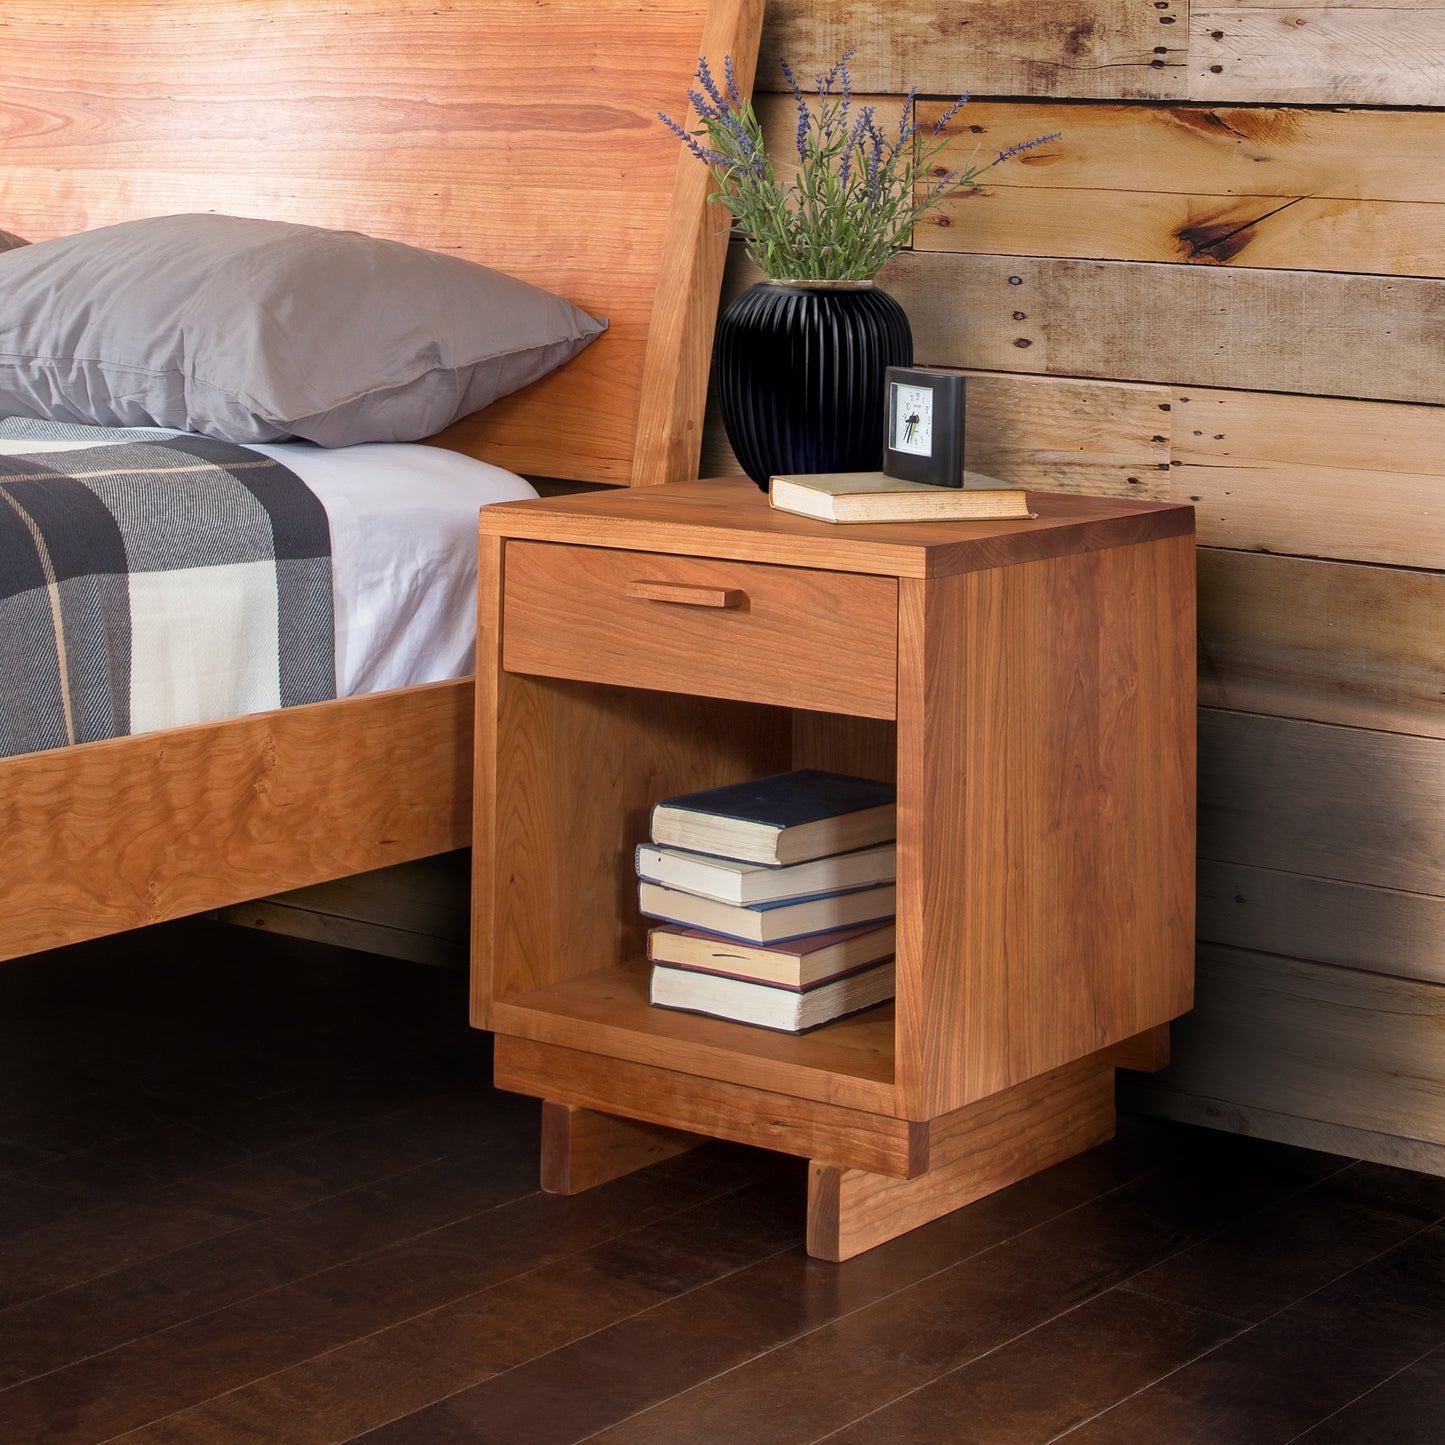 A Vermont Furniture Designs Loft 1-Drawer Enclosed Shelf Nightstand stands next to a bed, serving as a bedside table.